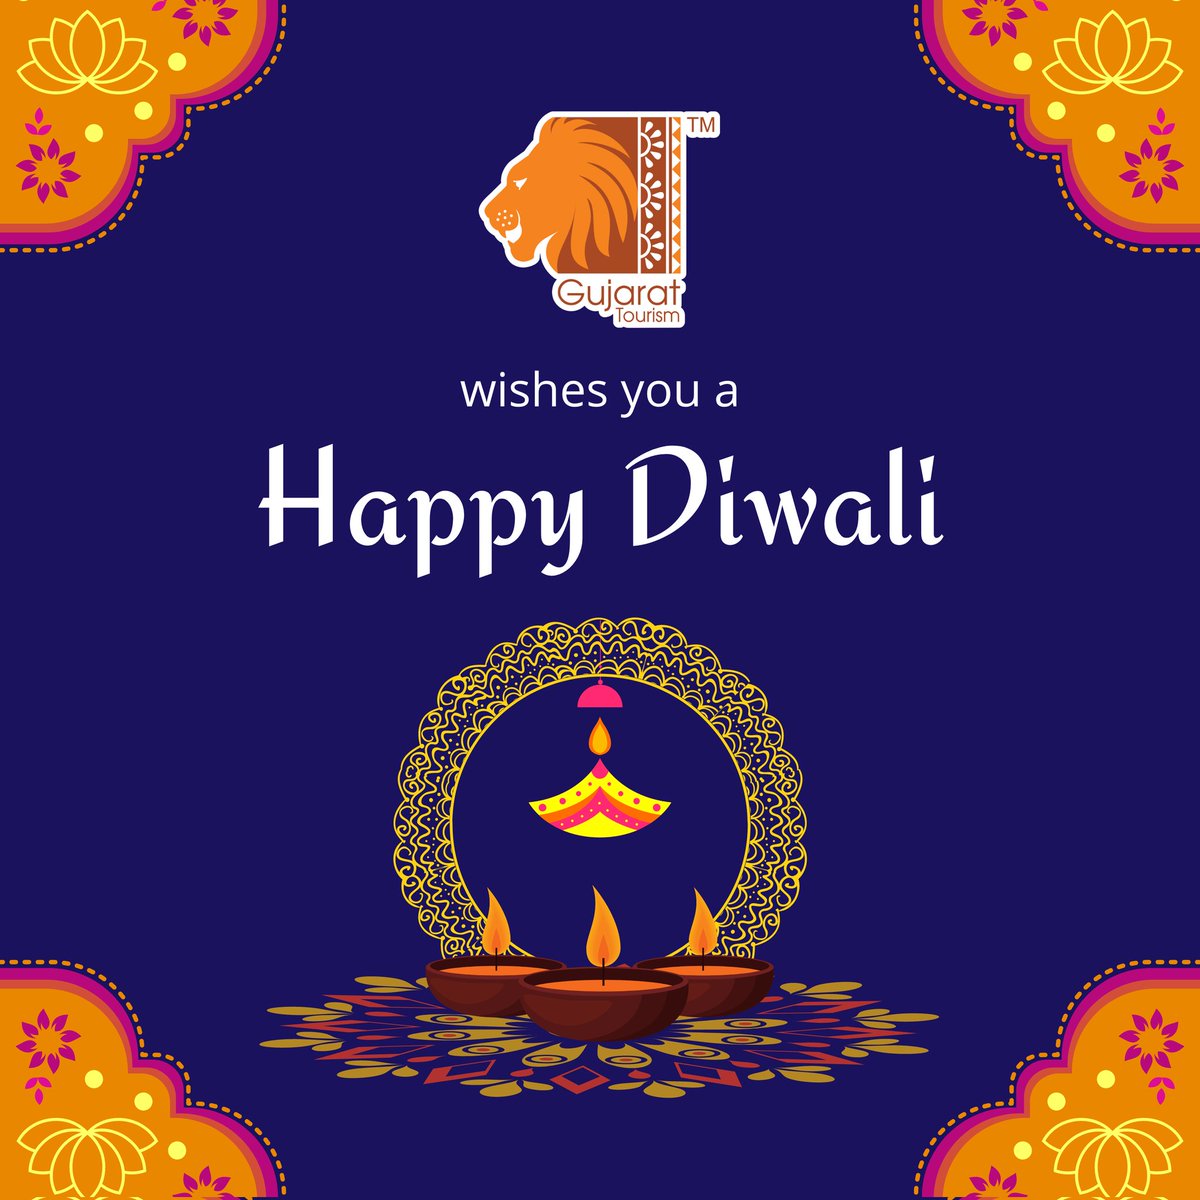 May the enchantment of gleaming diyas and lamps make this Diwali your brightest Diwali ever. Gujarat Tourism wishes you a Happy Diwali. #gujarattourism #diwali #diwali2022 #happydiwali @purneshmodi @iArvindRaiyani @hareets @AlokPandey_IAS